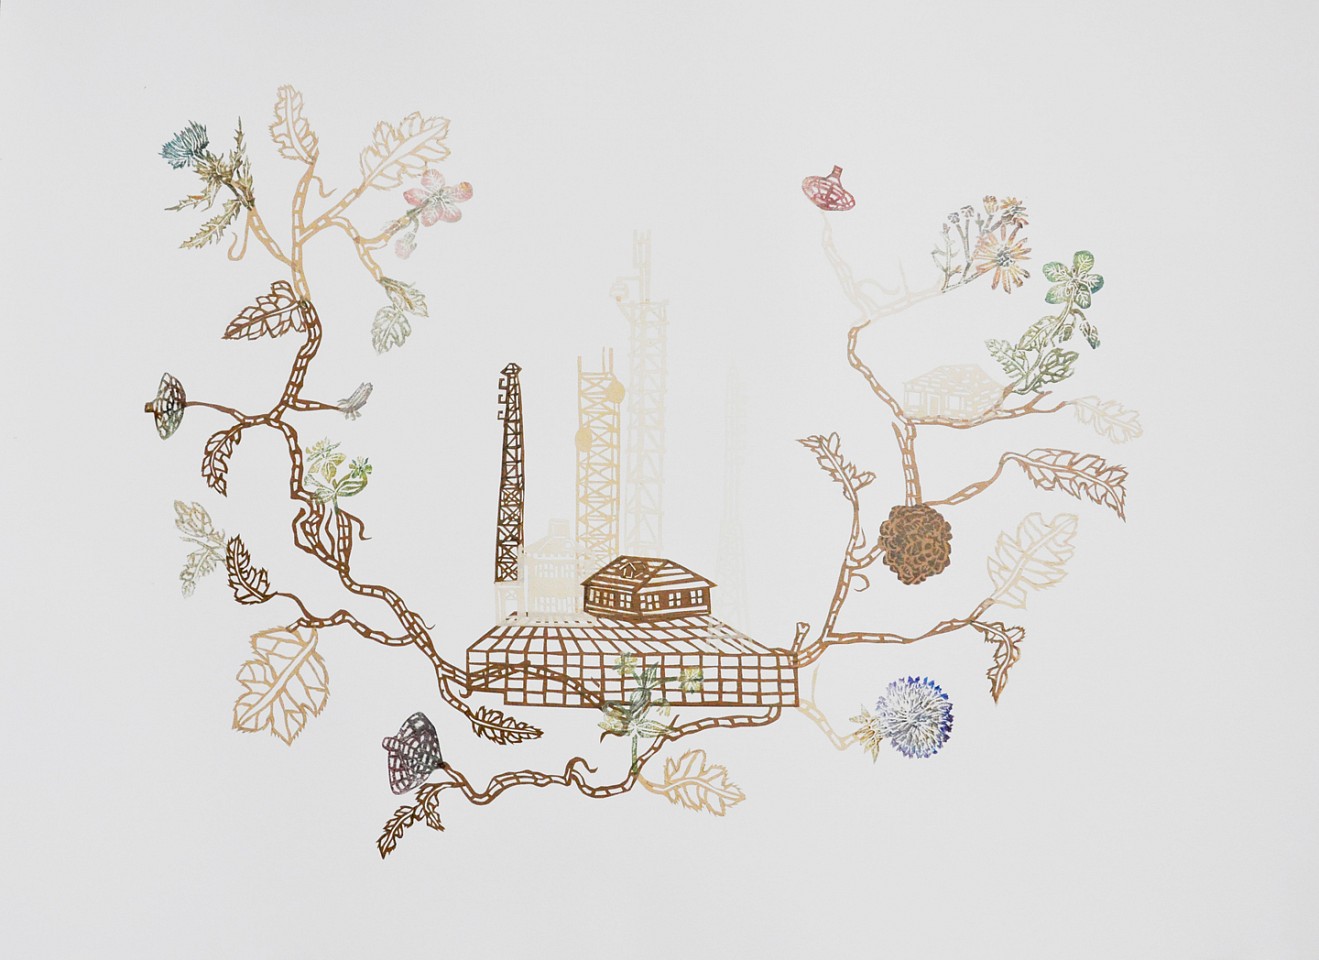 Susan Graham
Floating Landscape With House And Antenna Farm, 2019
GRA033
chine colle paper cut out and ukiyo-e woodblock print on cotton paper, 21 1/2 x 27 inches